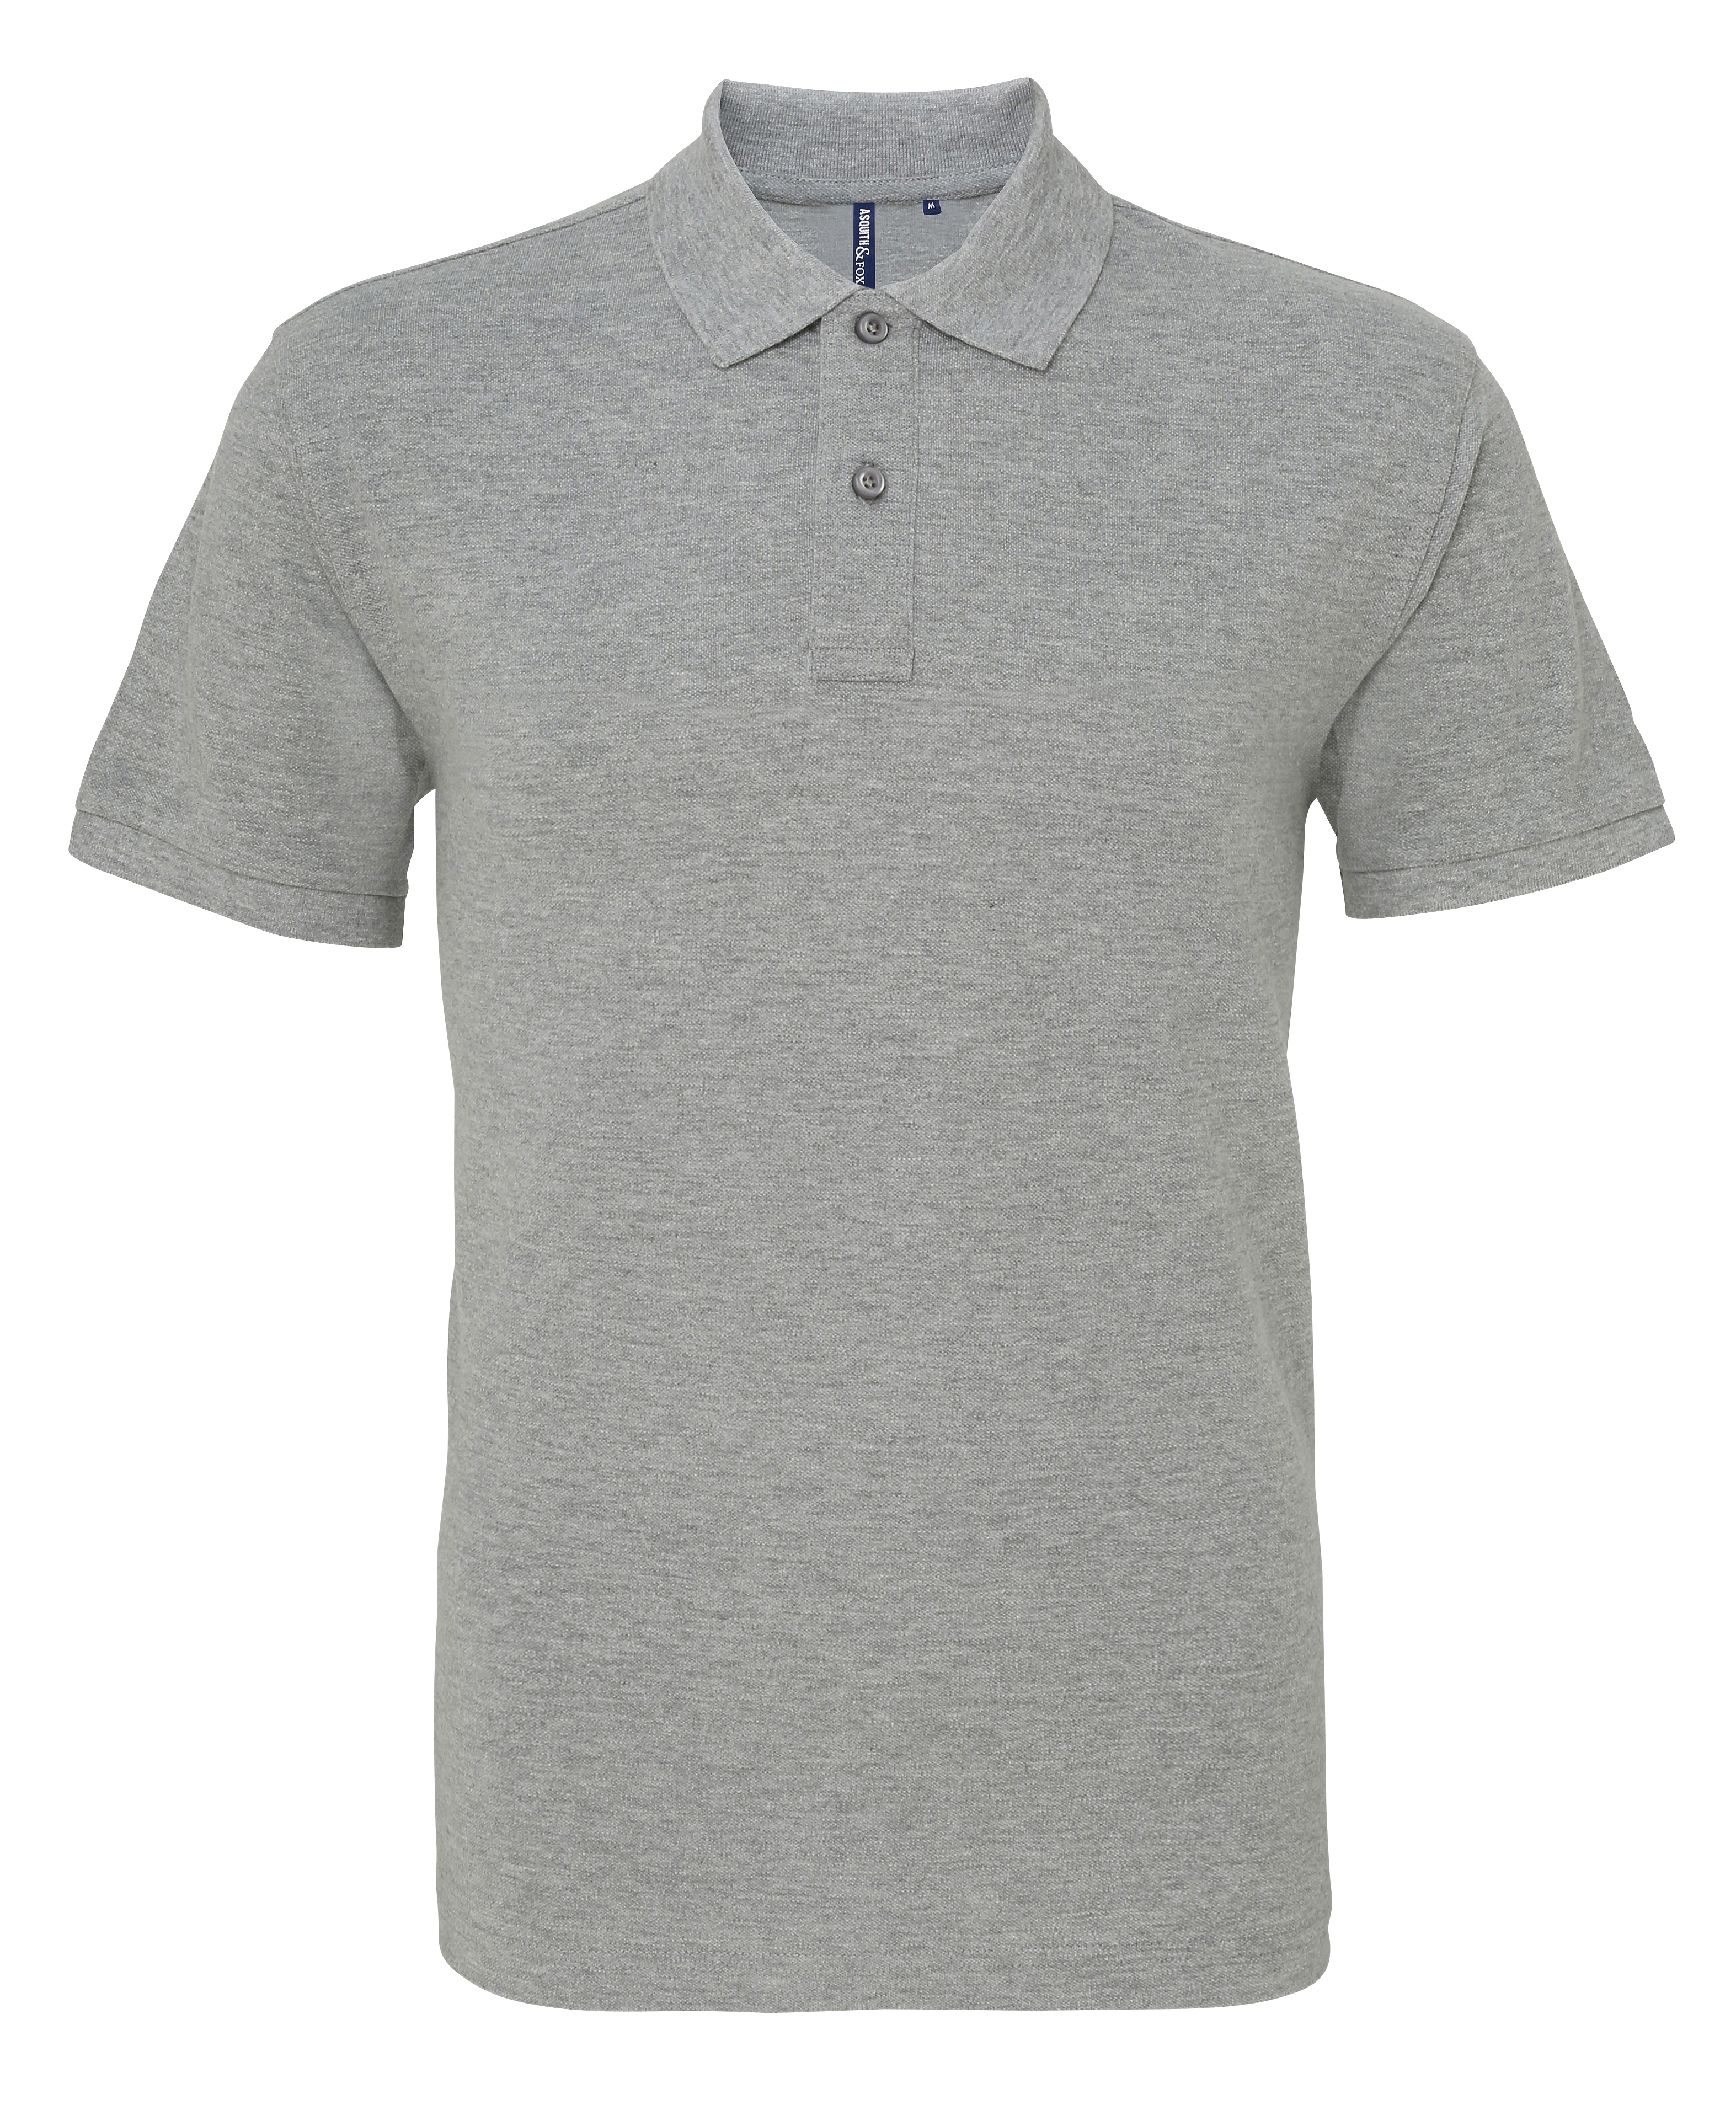 ax-httpswebsystems.s3.amazonaws.comtmp_for_downloadasquith-and-fox-men27s-polo-heather-grey.jpg